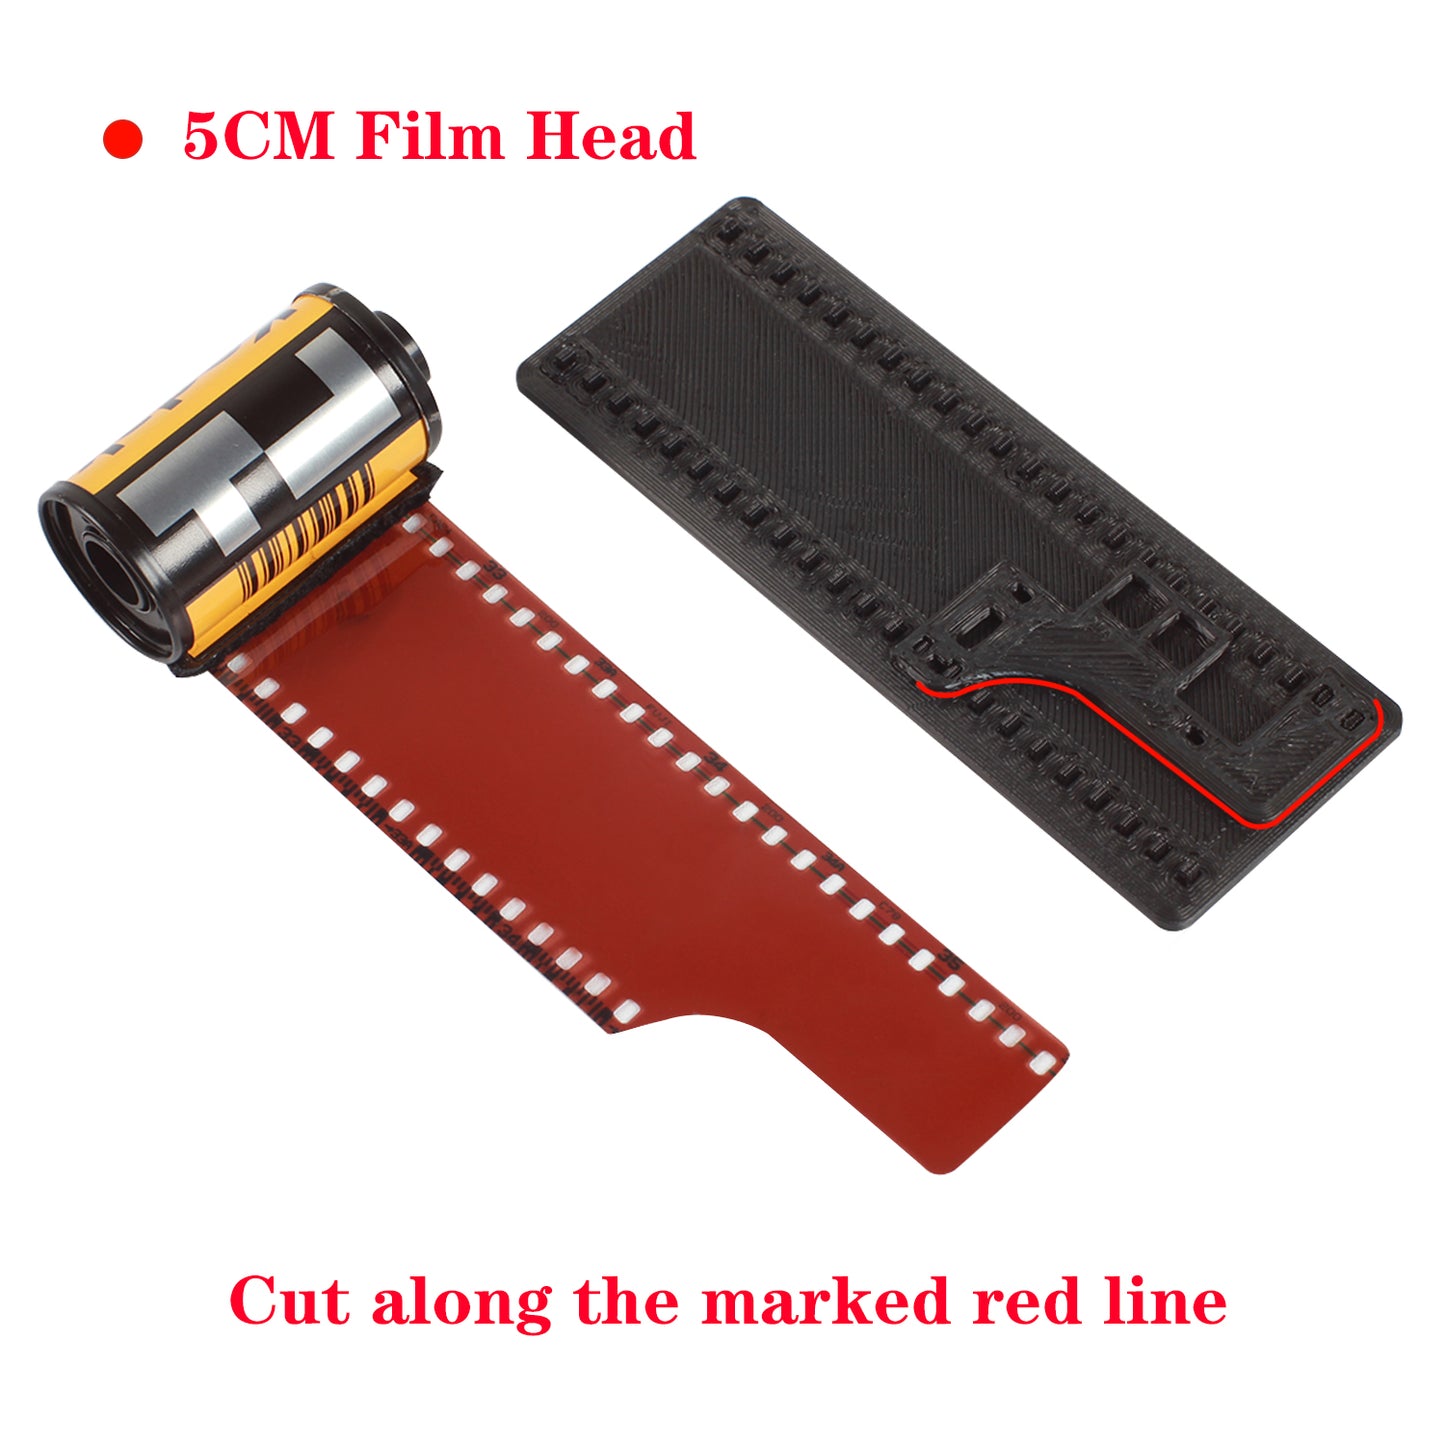 Multi-function Film Leader Cutter Trimming Template for Vintage Leica Ablon Barnack Leica 3a 3c m1 m2 m3 Film Cutting 5cm 10cm Guide Tool